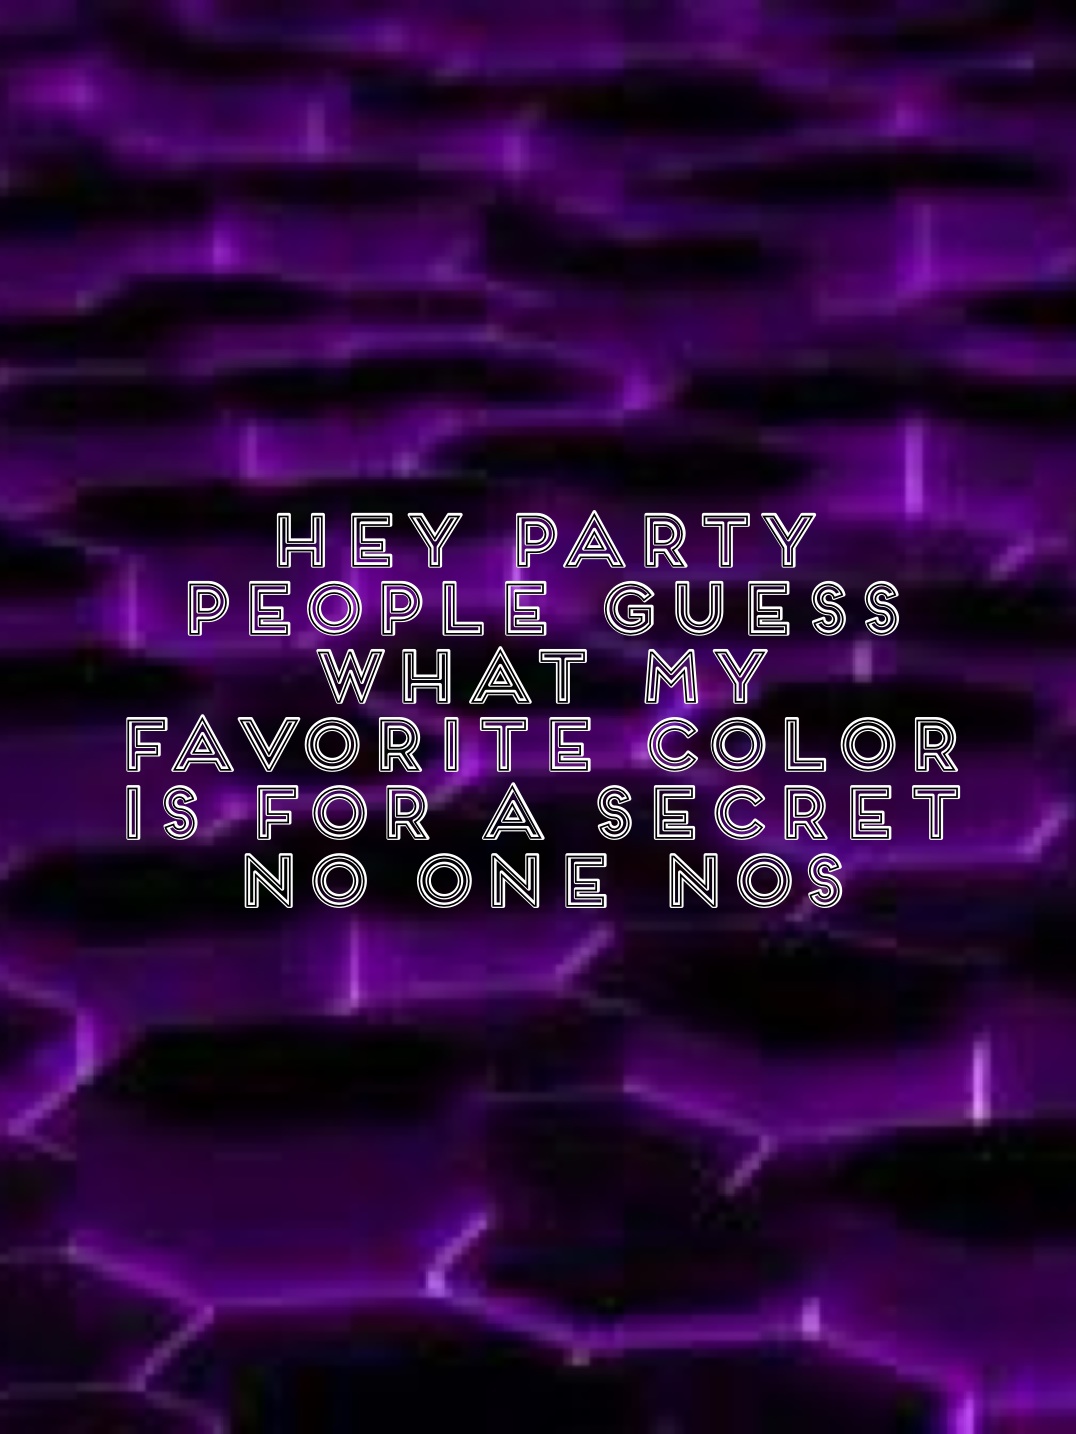 Hey party people guess what my favorite color word and food is for a secret no one nos
